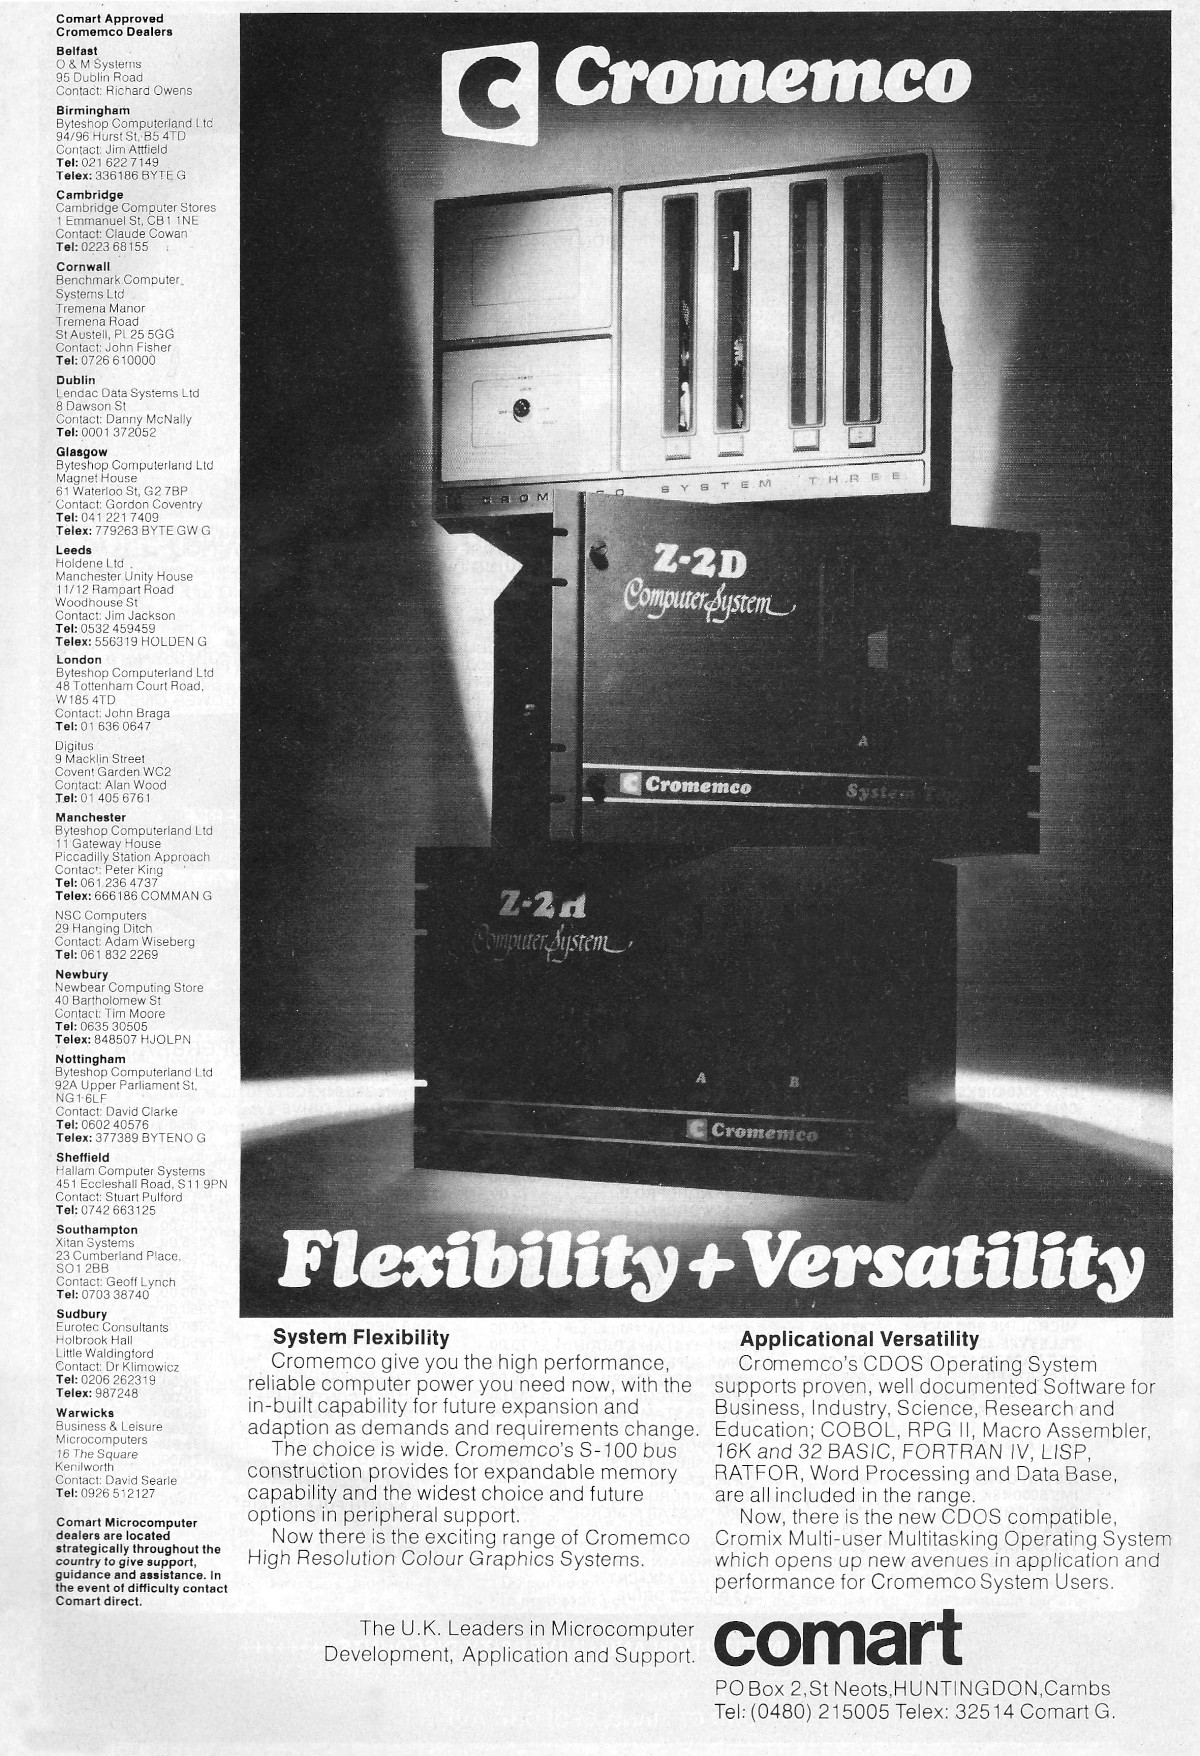 An advert for Comart the reseller, showing the Cromemco Z-2, which had been around since 1977. From Personal Computer World, January 1981